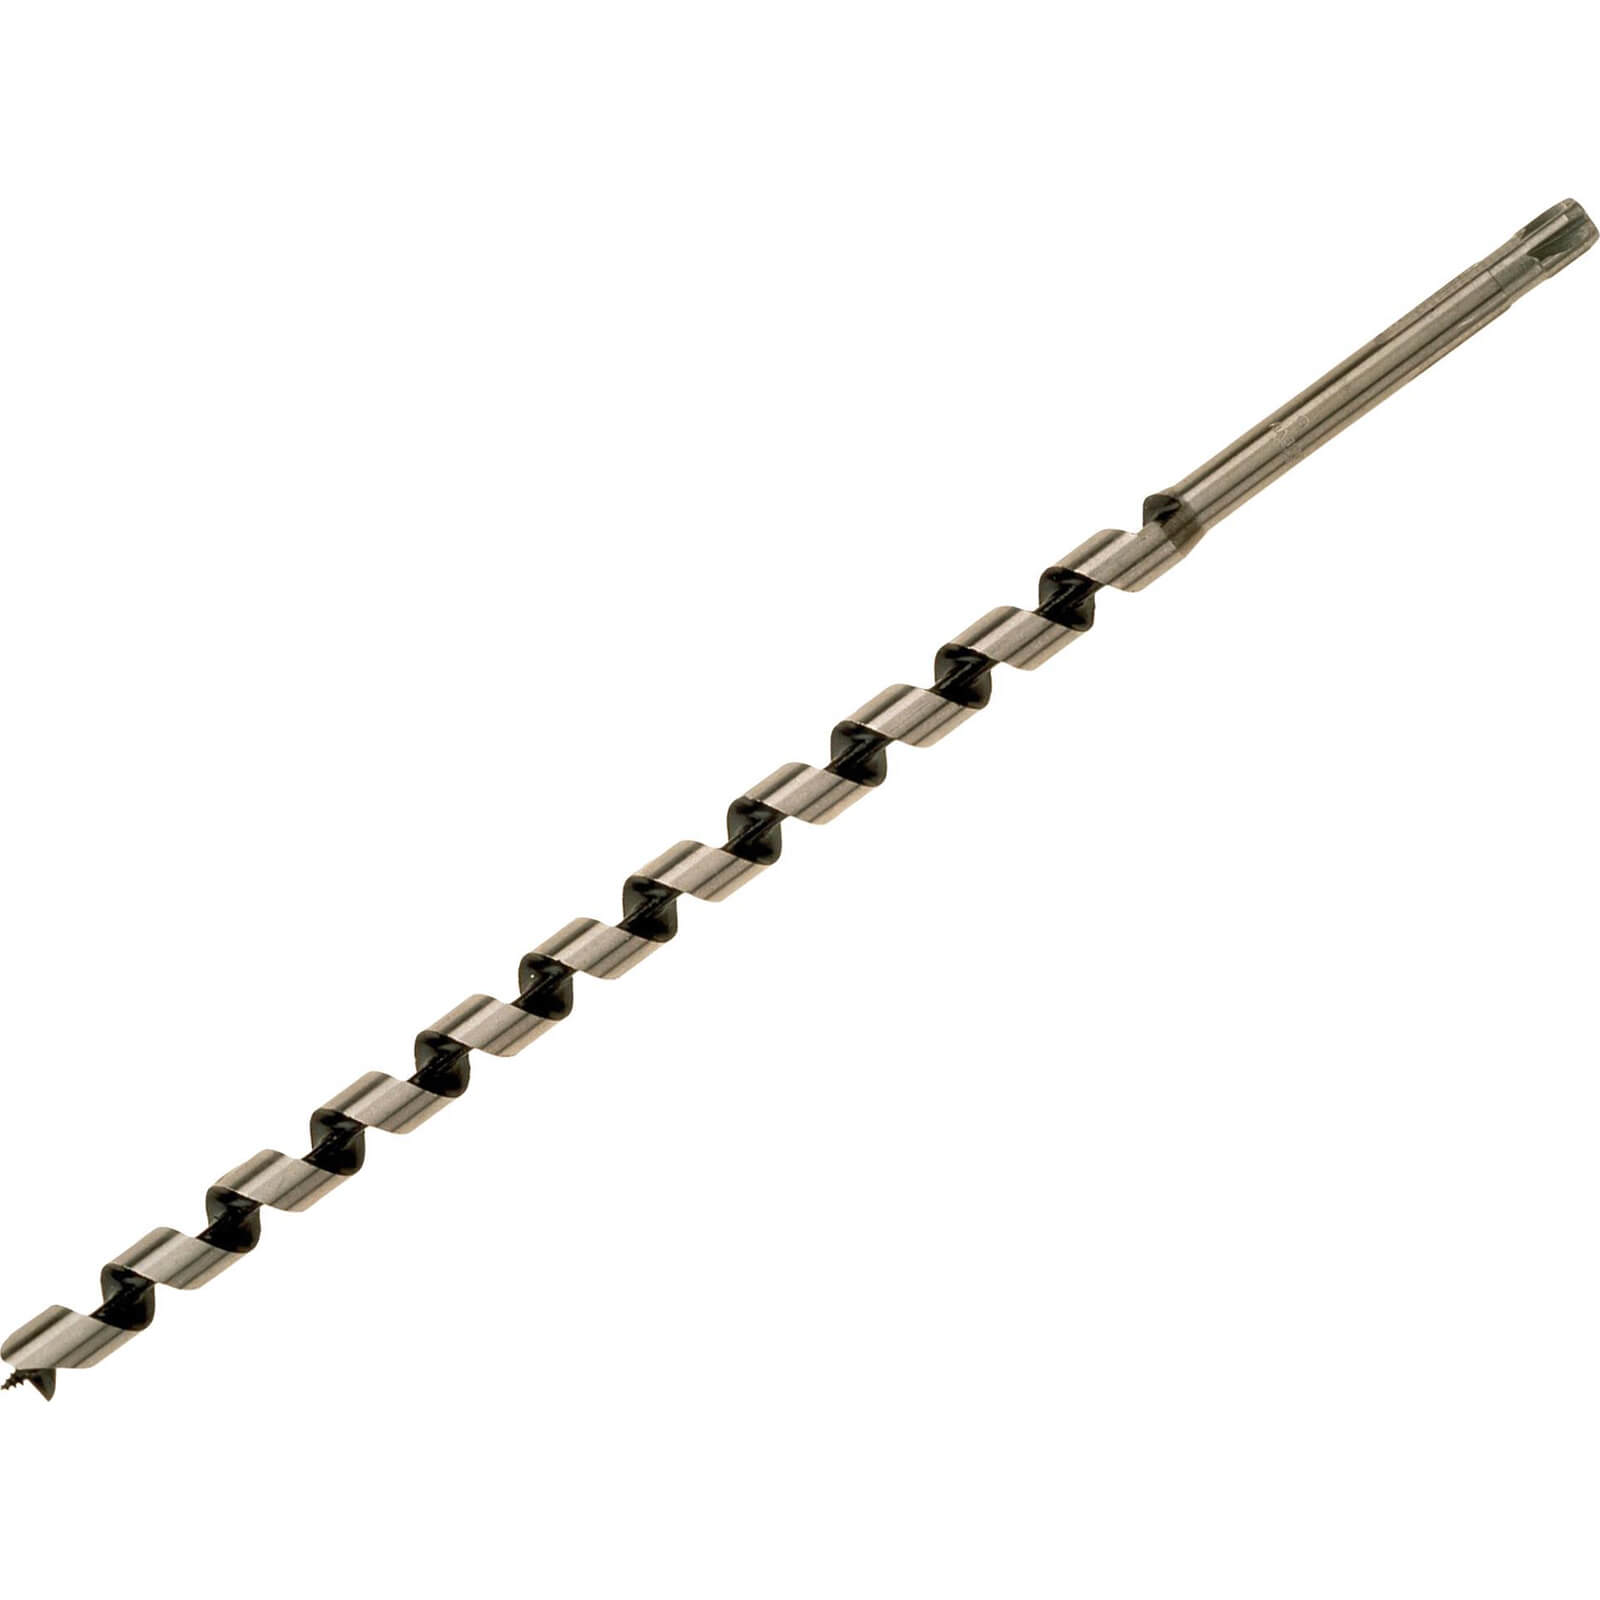 Photo of Bahco 9627 Series Long Combination Auger Drill Bit 24mm 460mm